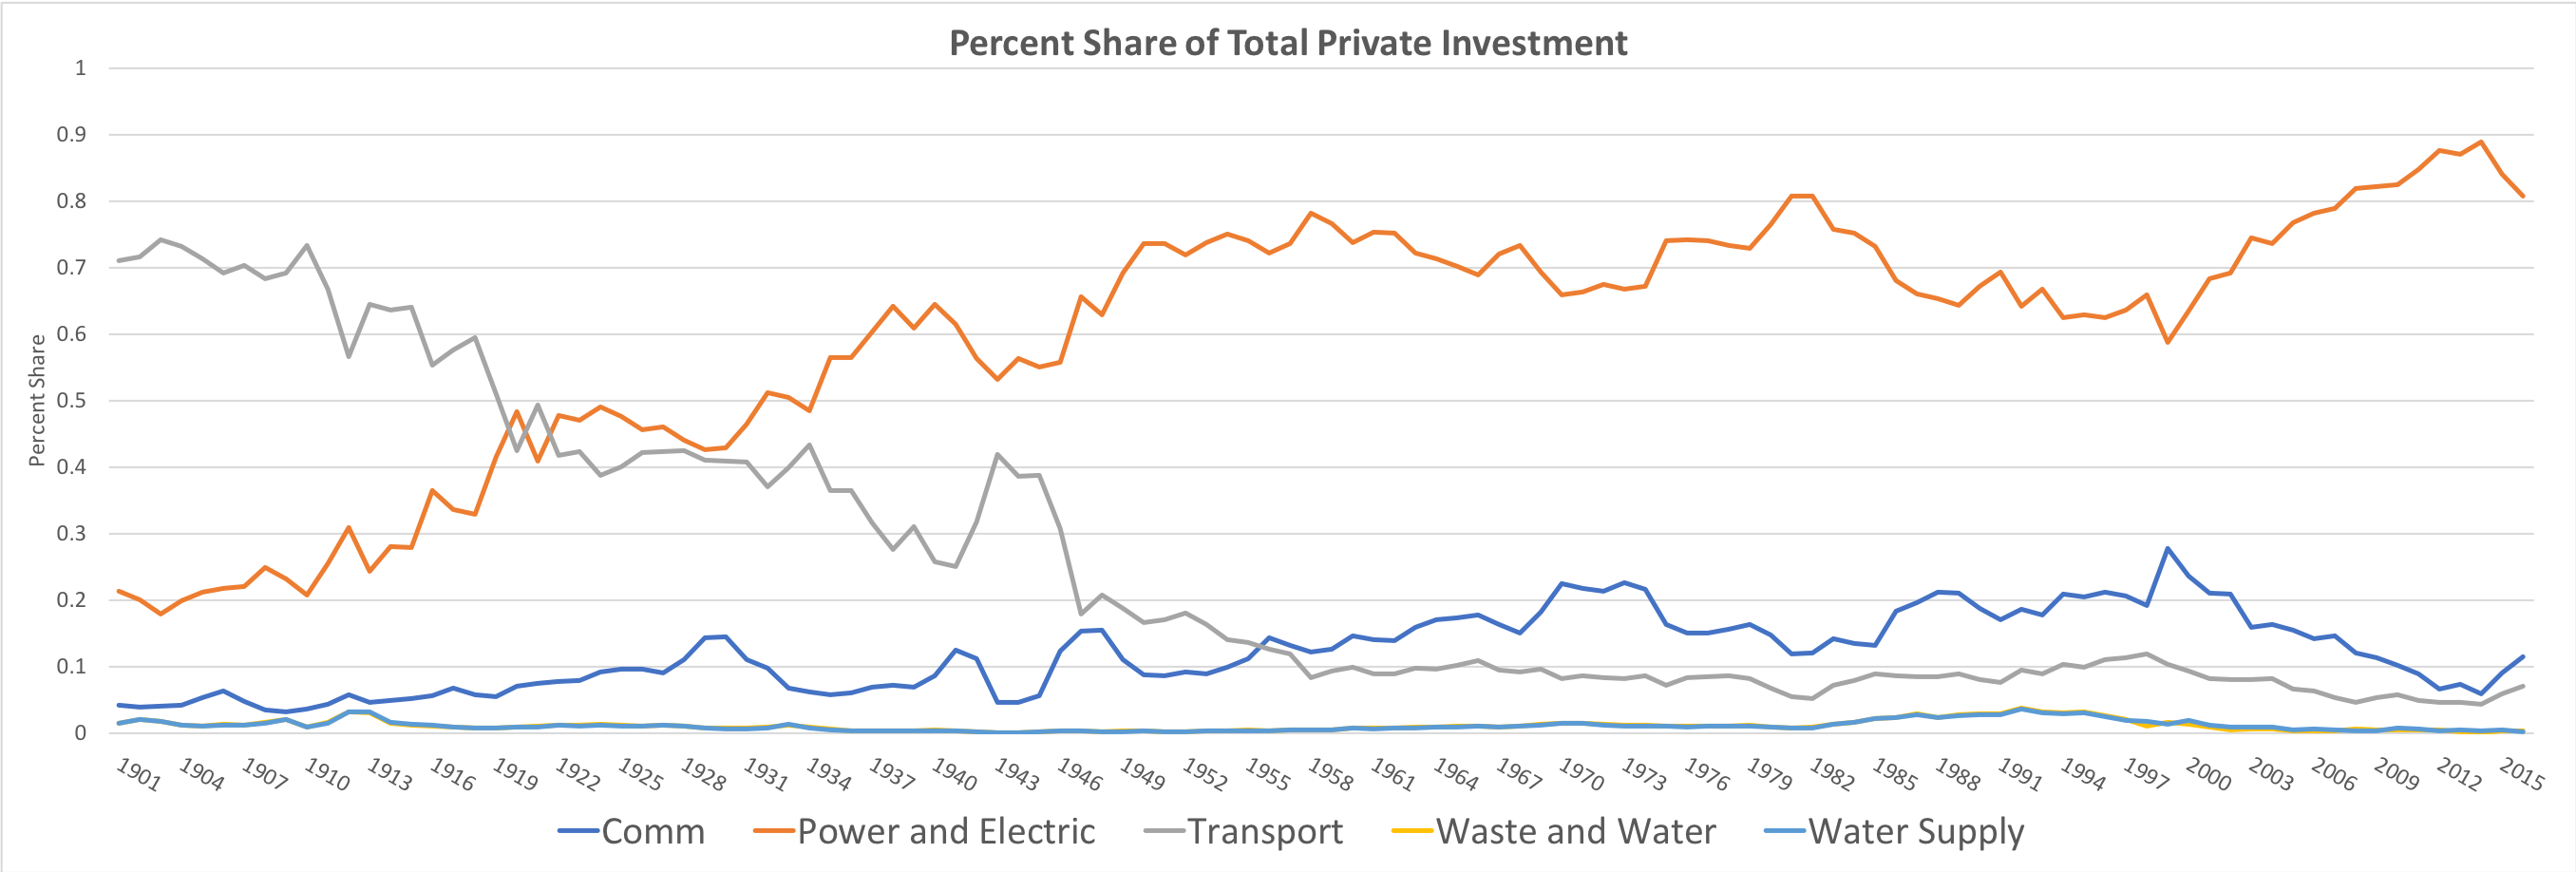 PercentShare_PrivateInvestment.png